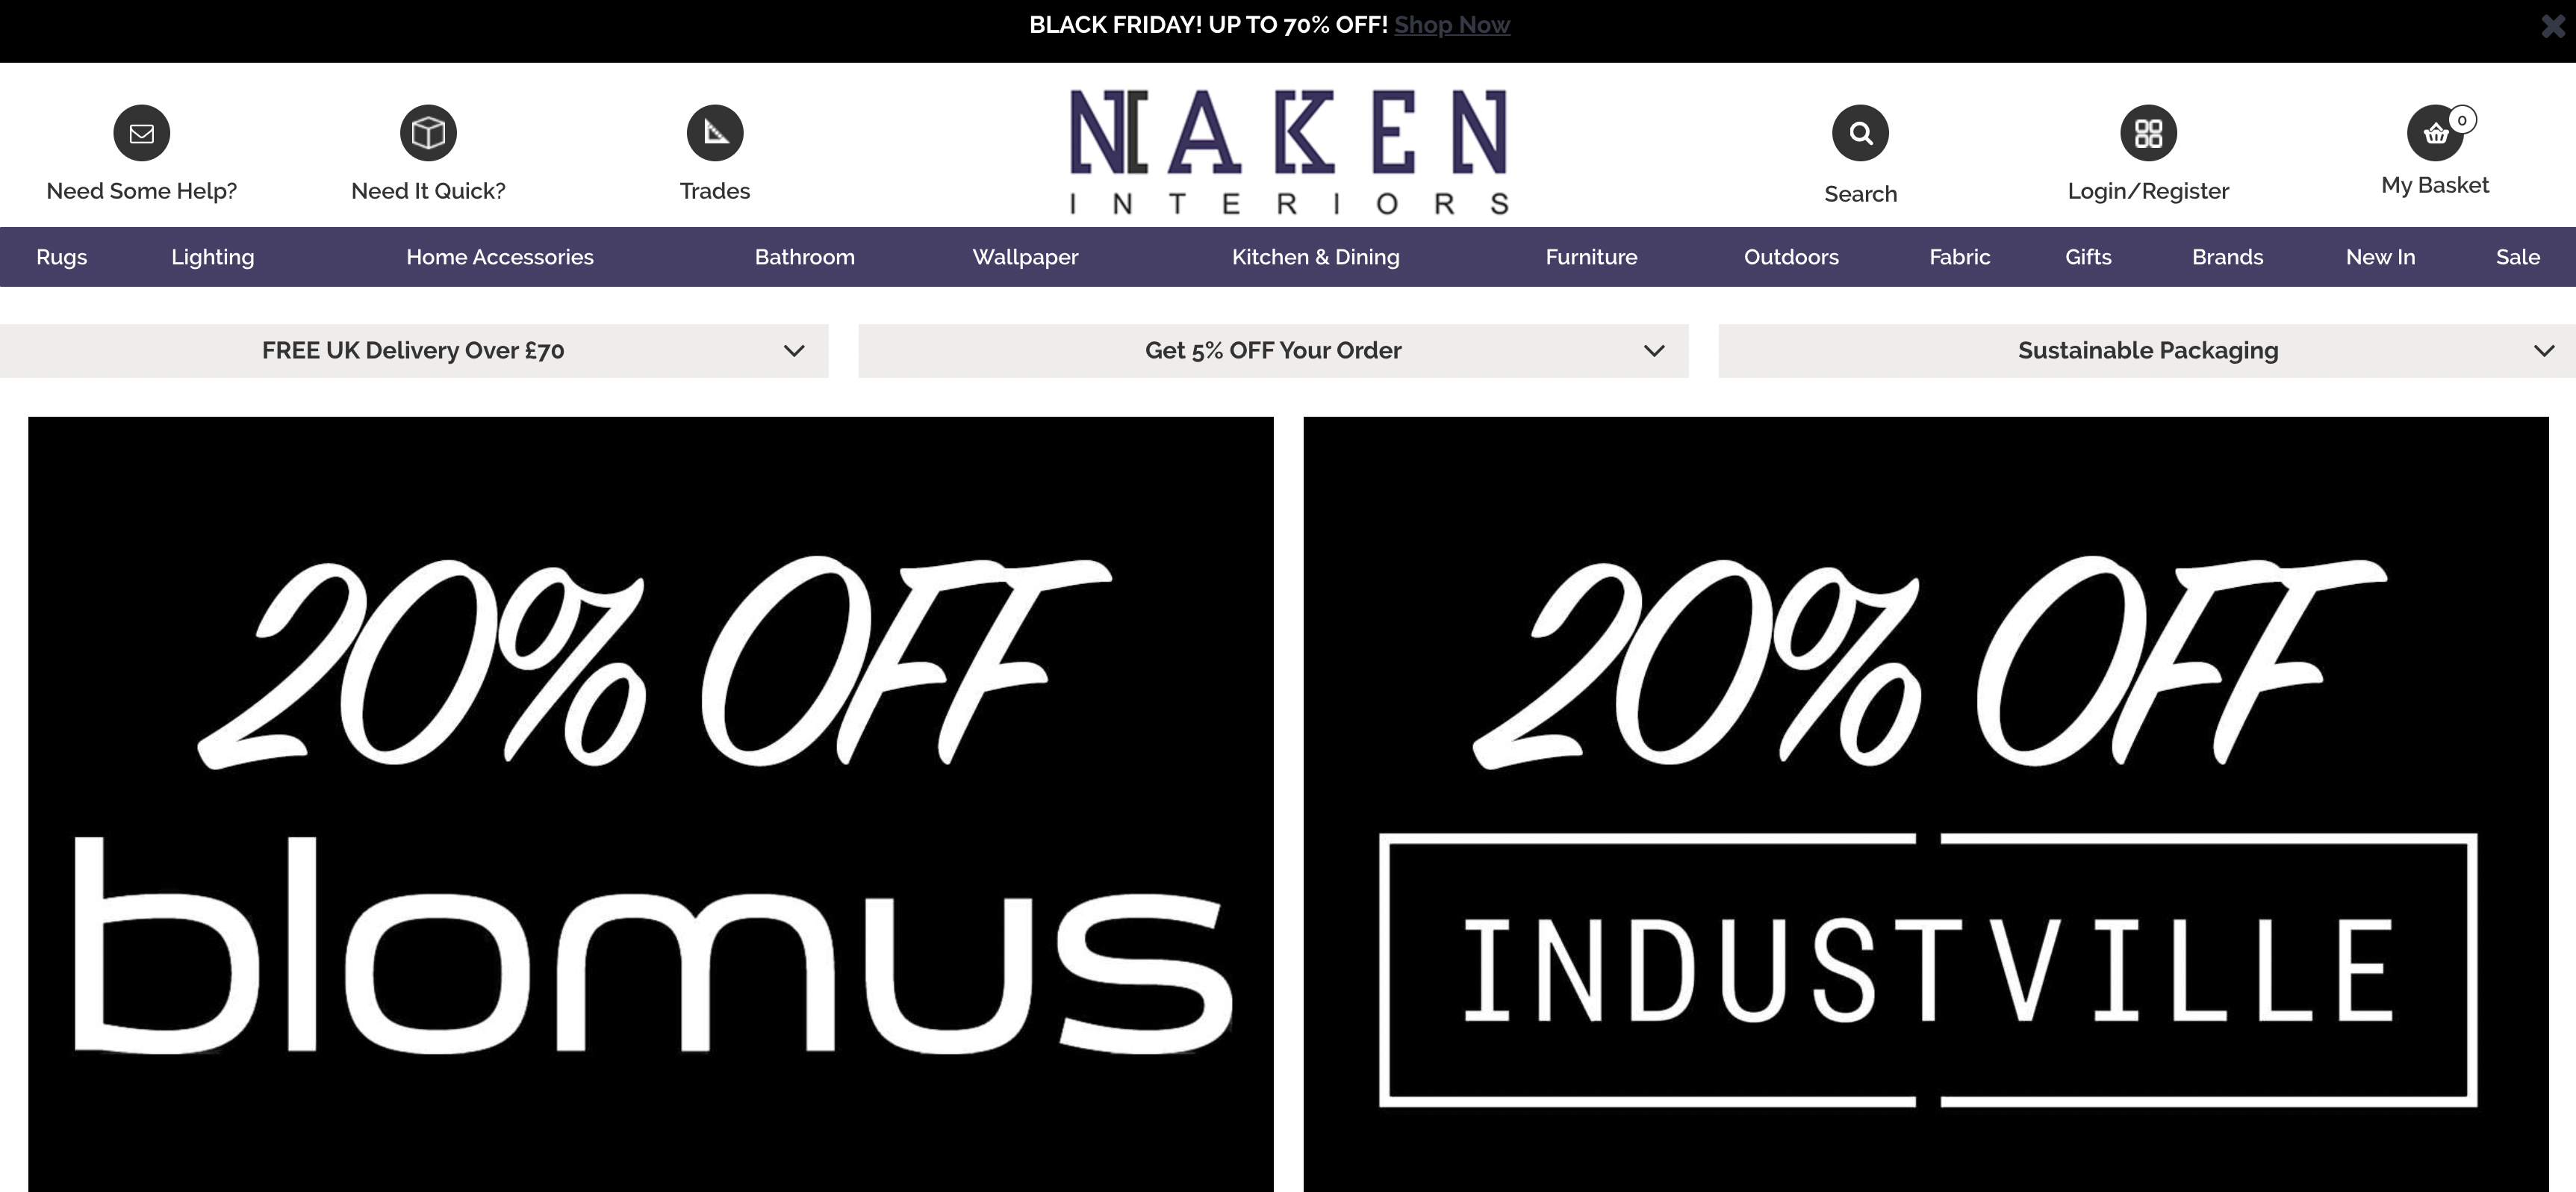 Naken is popular UK web furniture shop created by Entro Solutions